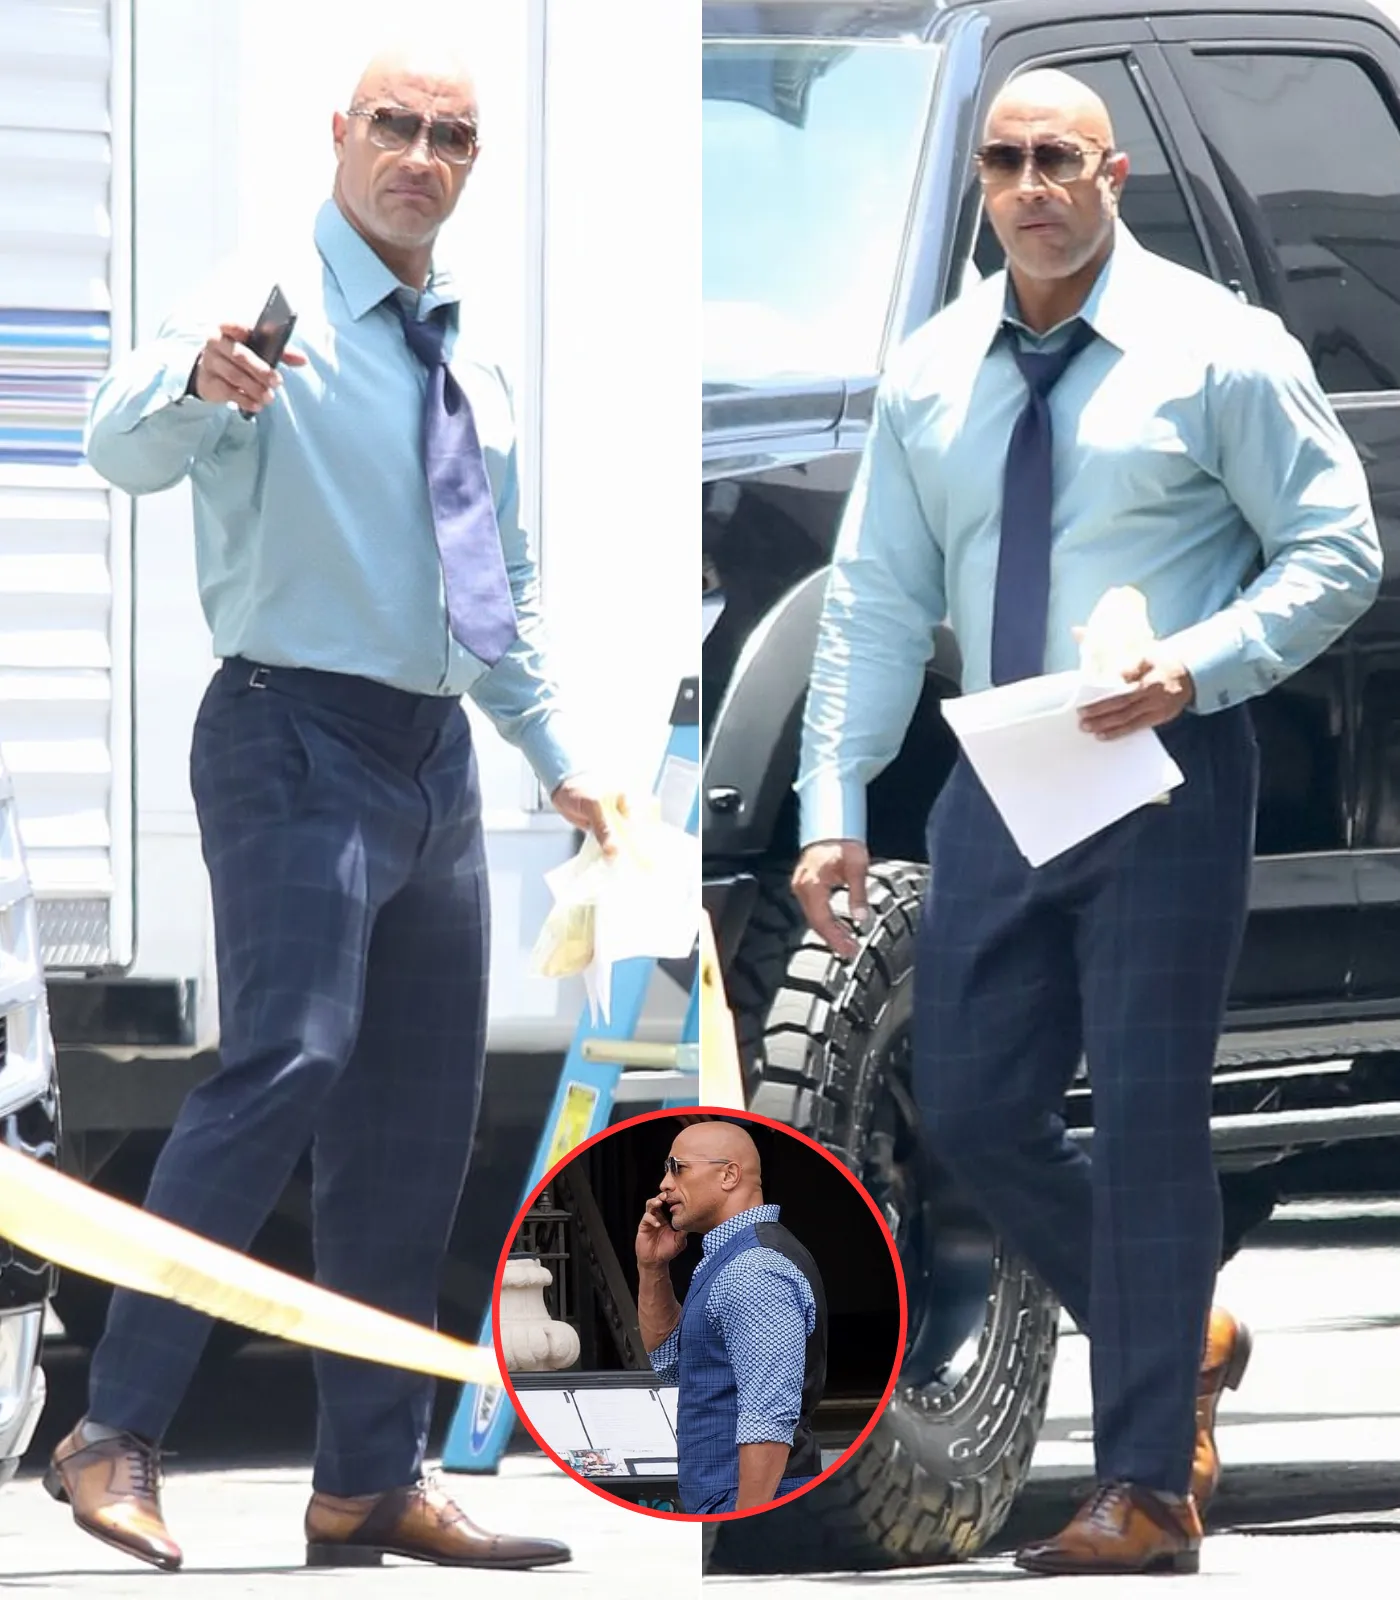 Dwayne 'The Rock' Johnson wears plaid trousers with button up shirt and tie while on the set of Ballers